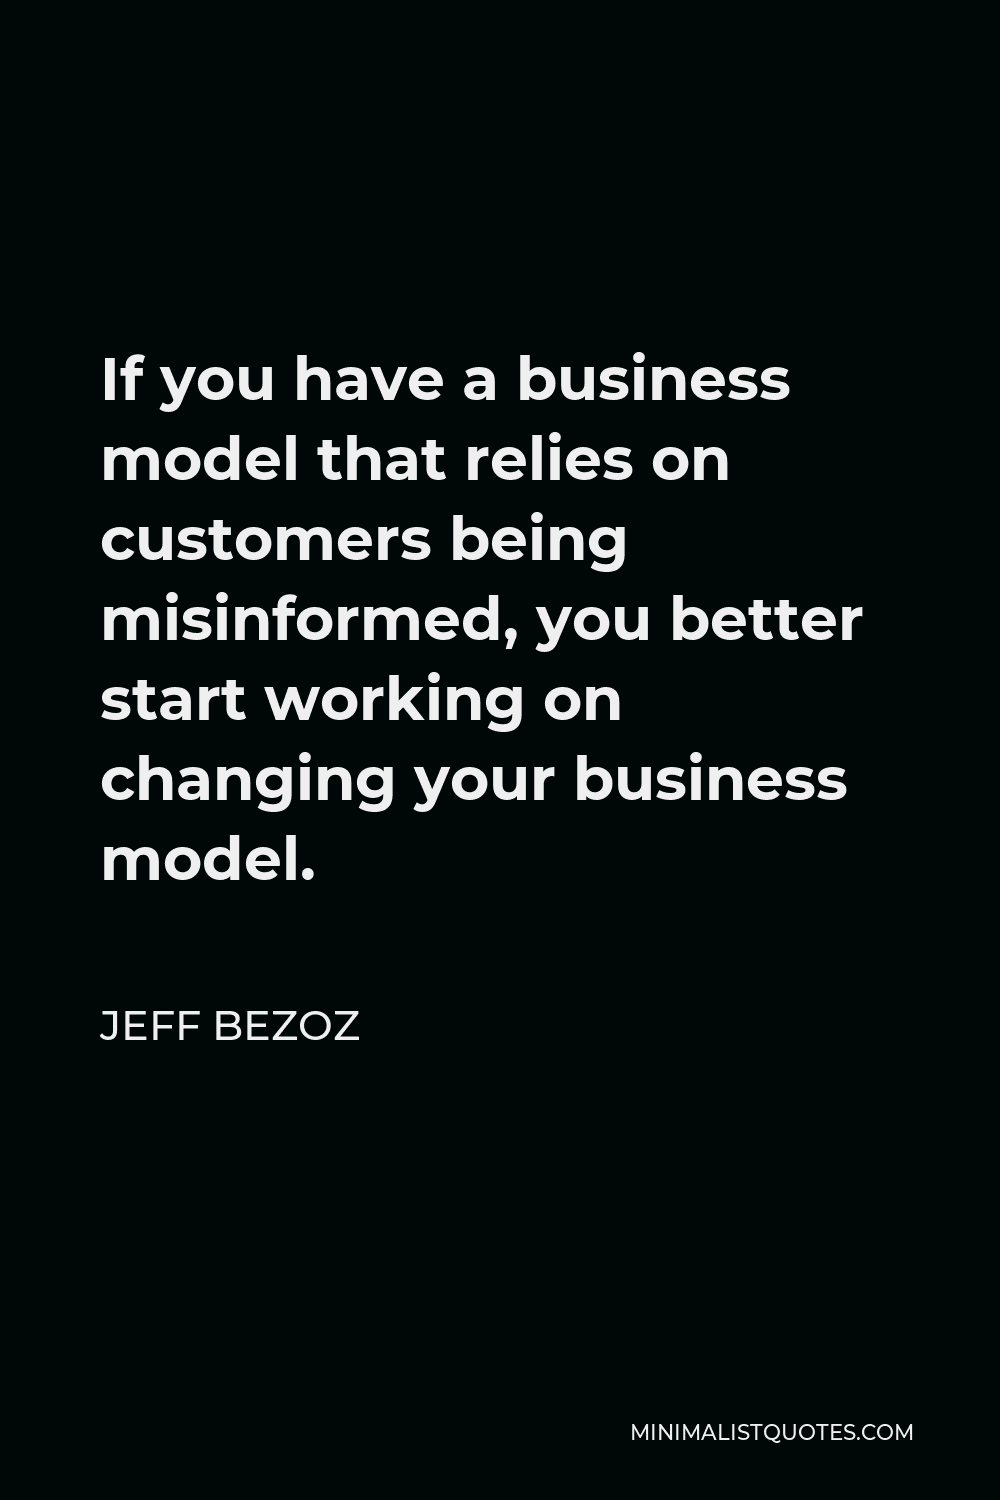 Jeff Bezoz Quote - If you have a business model that relies on customers being misinformed, you better start working on changing your business model.